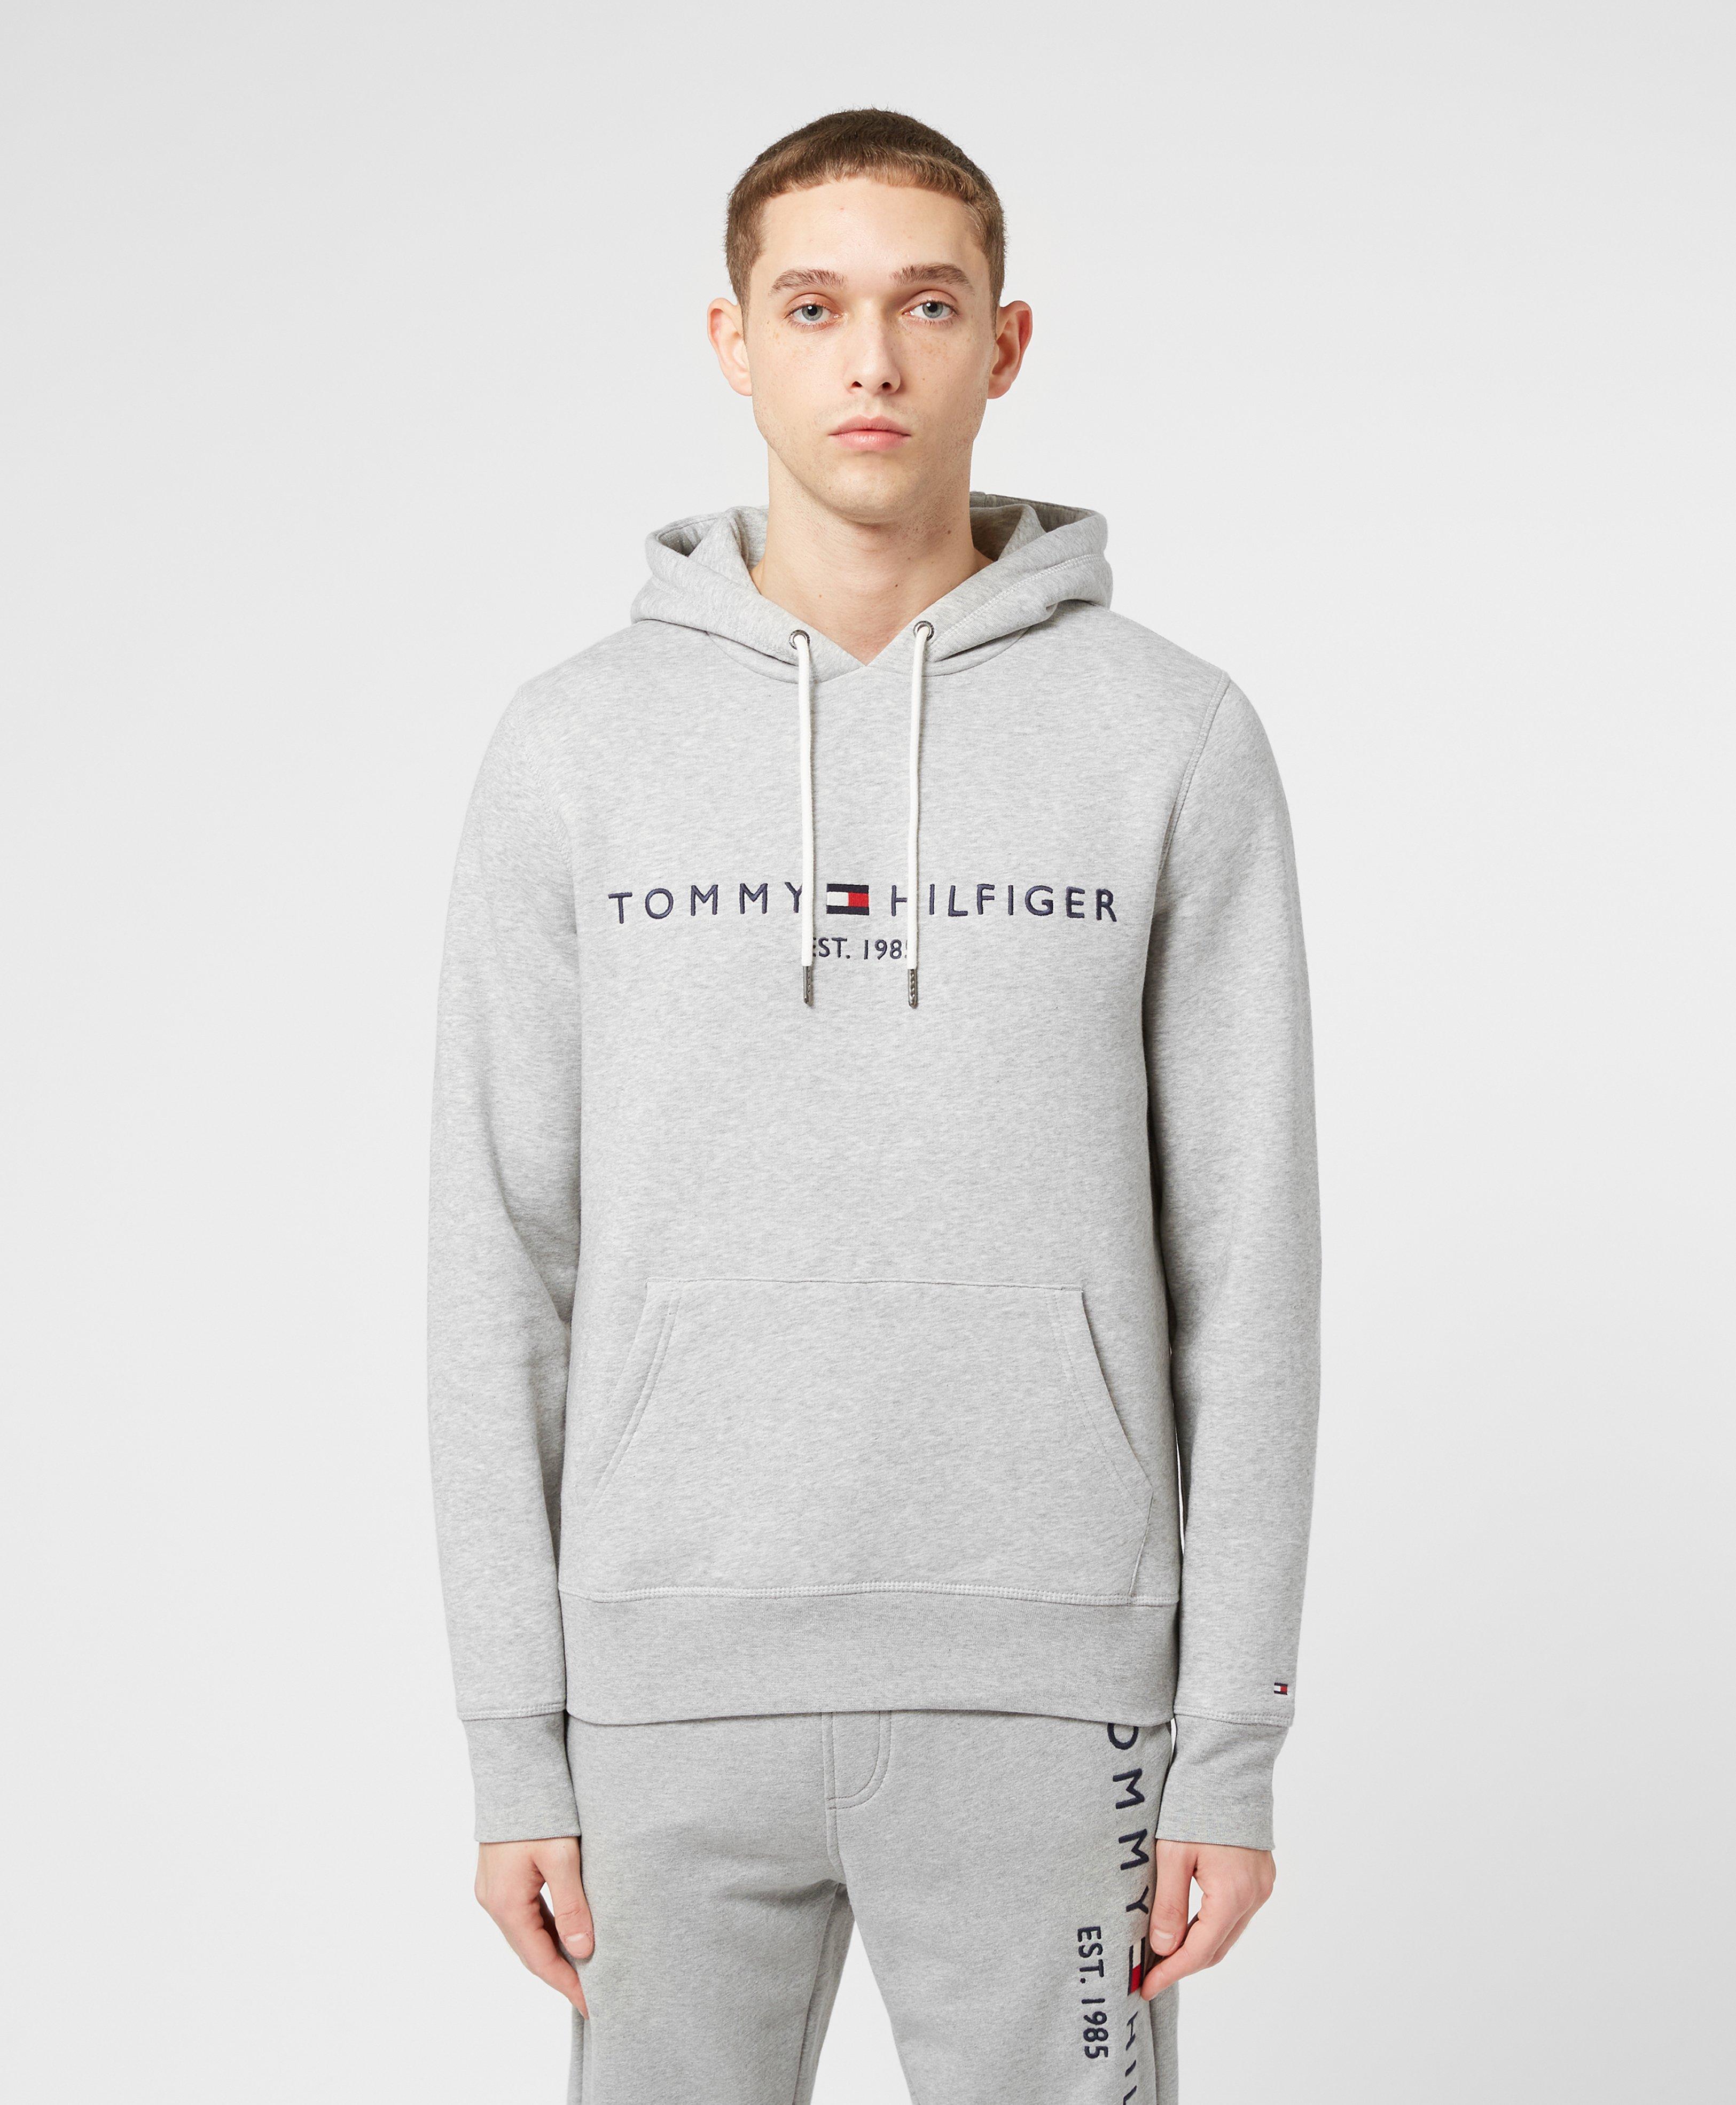 Tommy Hilfiger Cotton Tommy Logo Hoodie in Grey (Blue) for Men - Save 37% -  Lyst